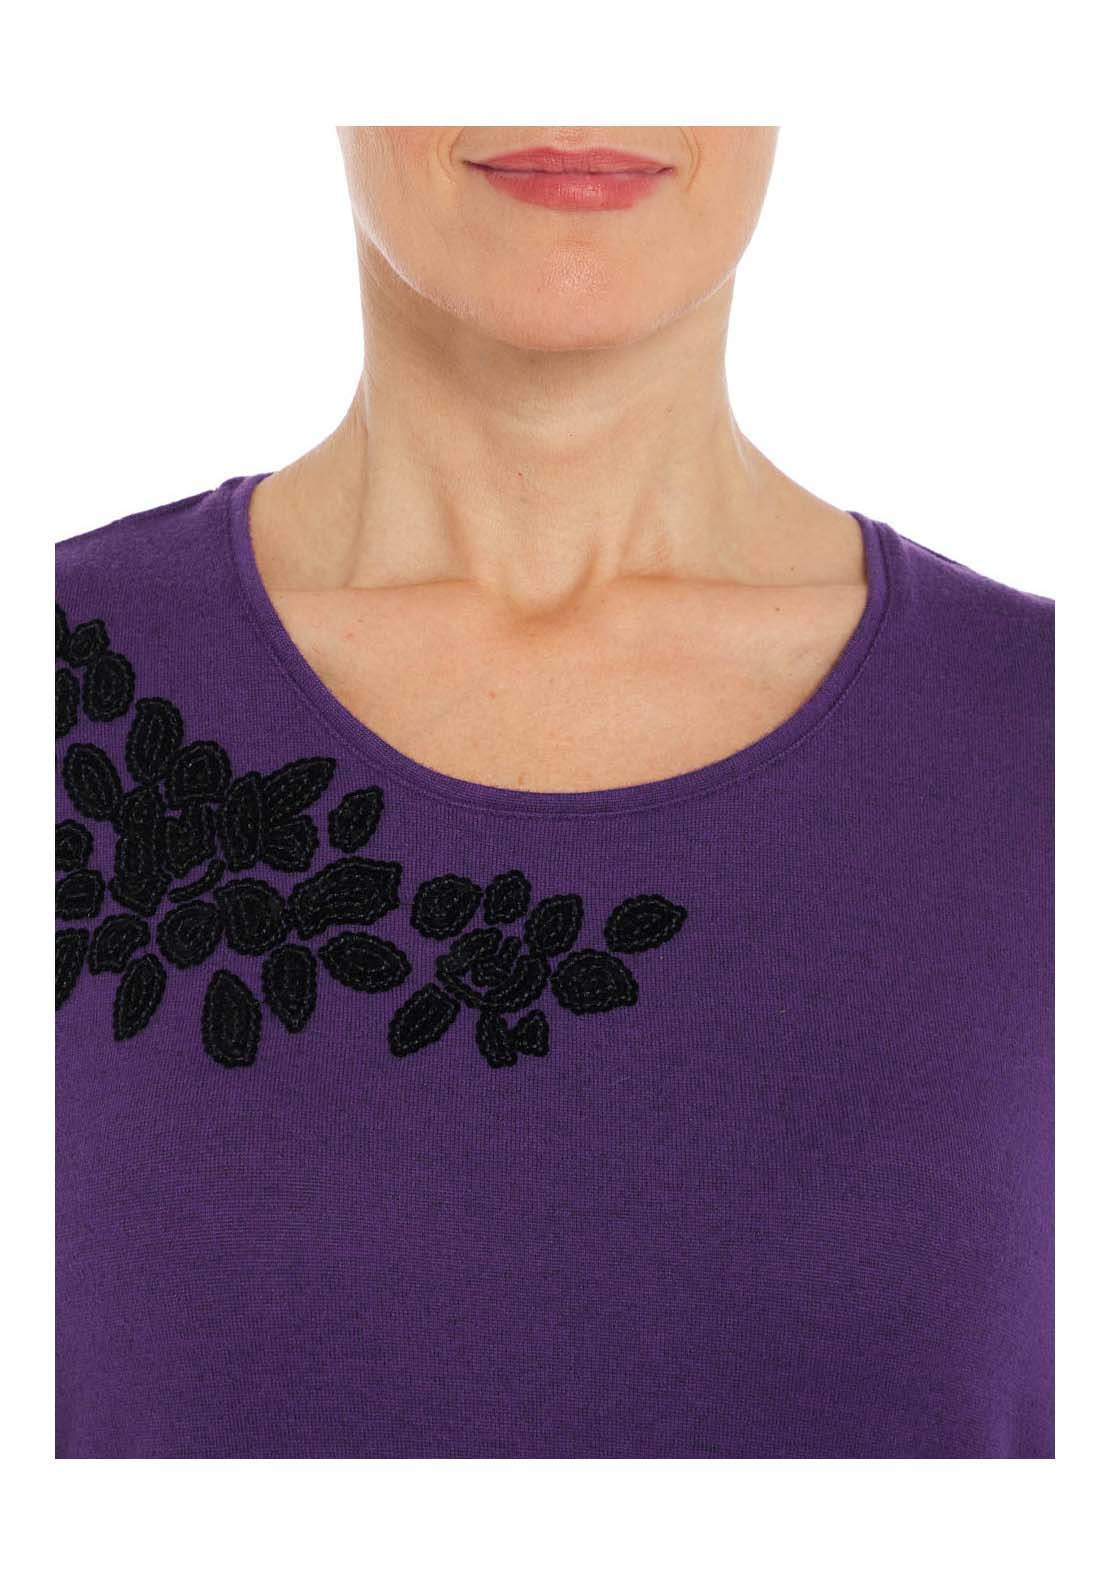 Tigiwear Embellished Lilac Cowl Neck Top 3 Shaws Department Stores